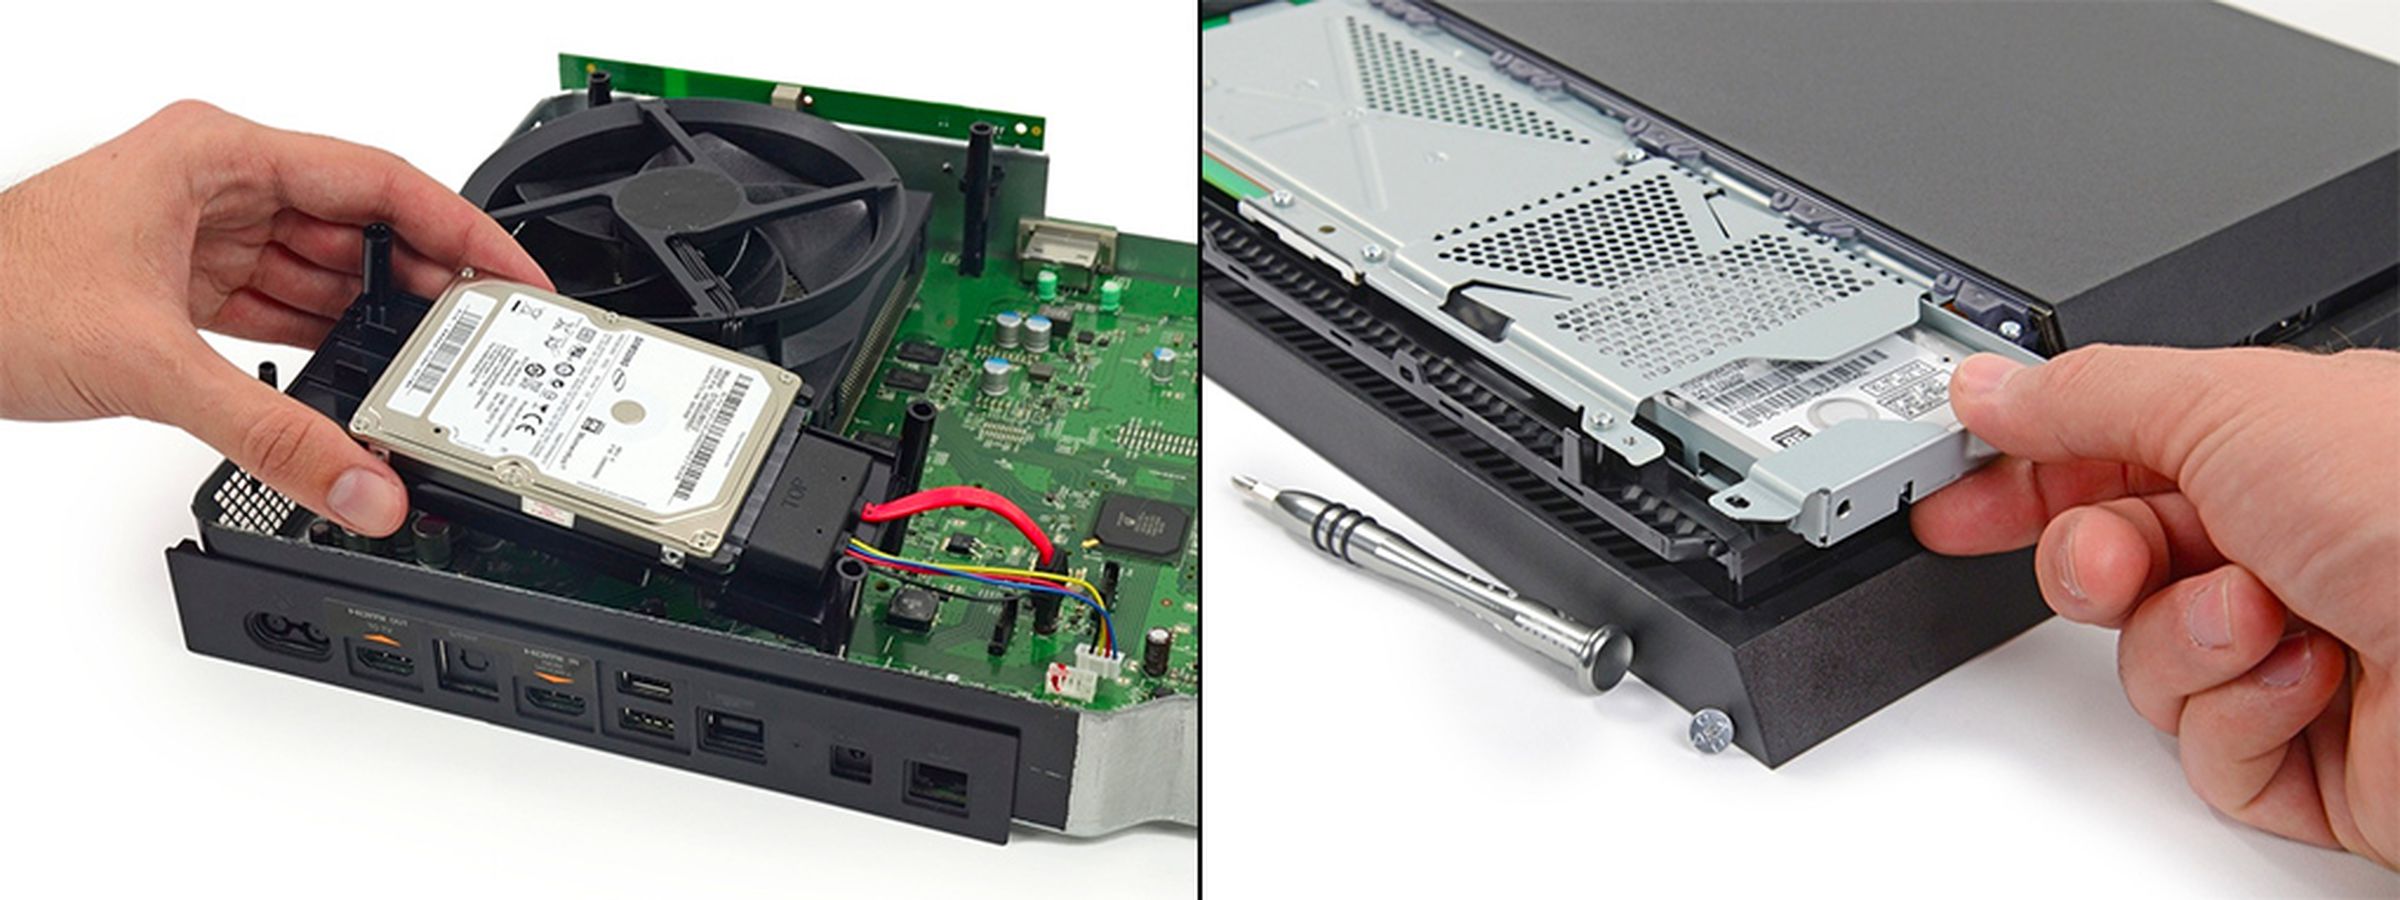 Inside the Xbox One and PlayStation 4